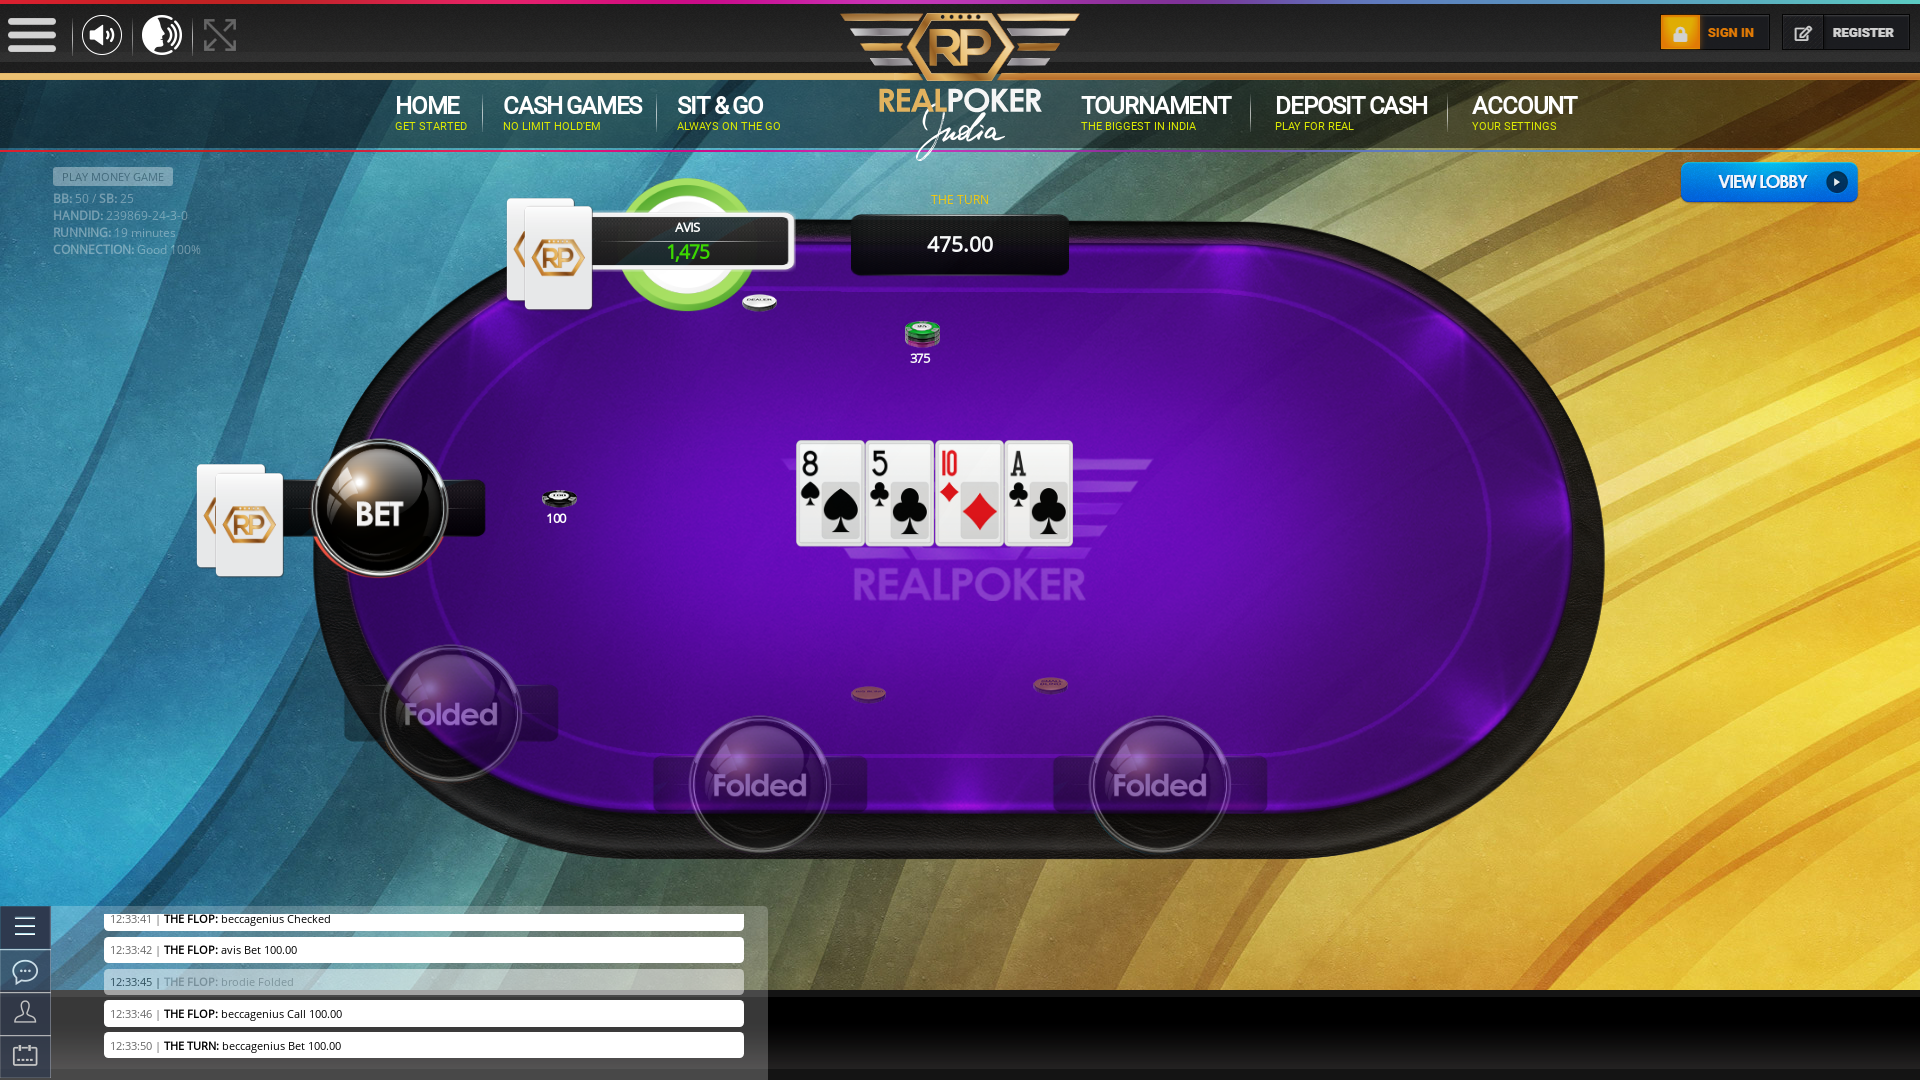 Real poker 10 player table in the 19th minute